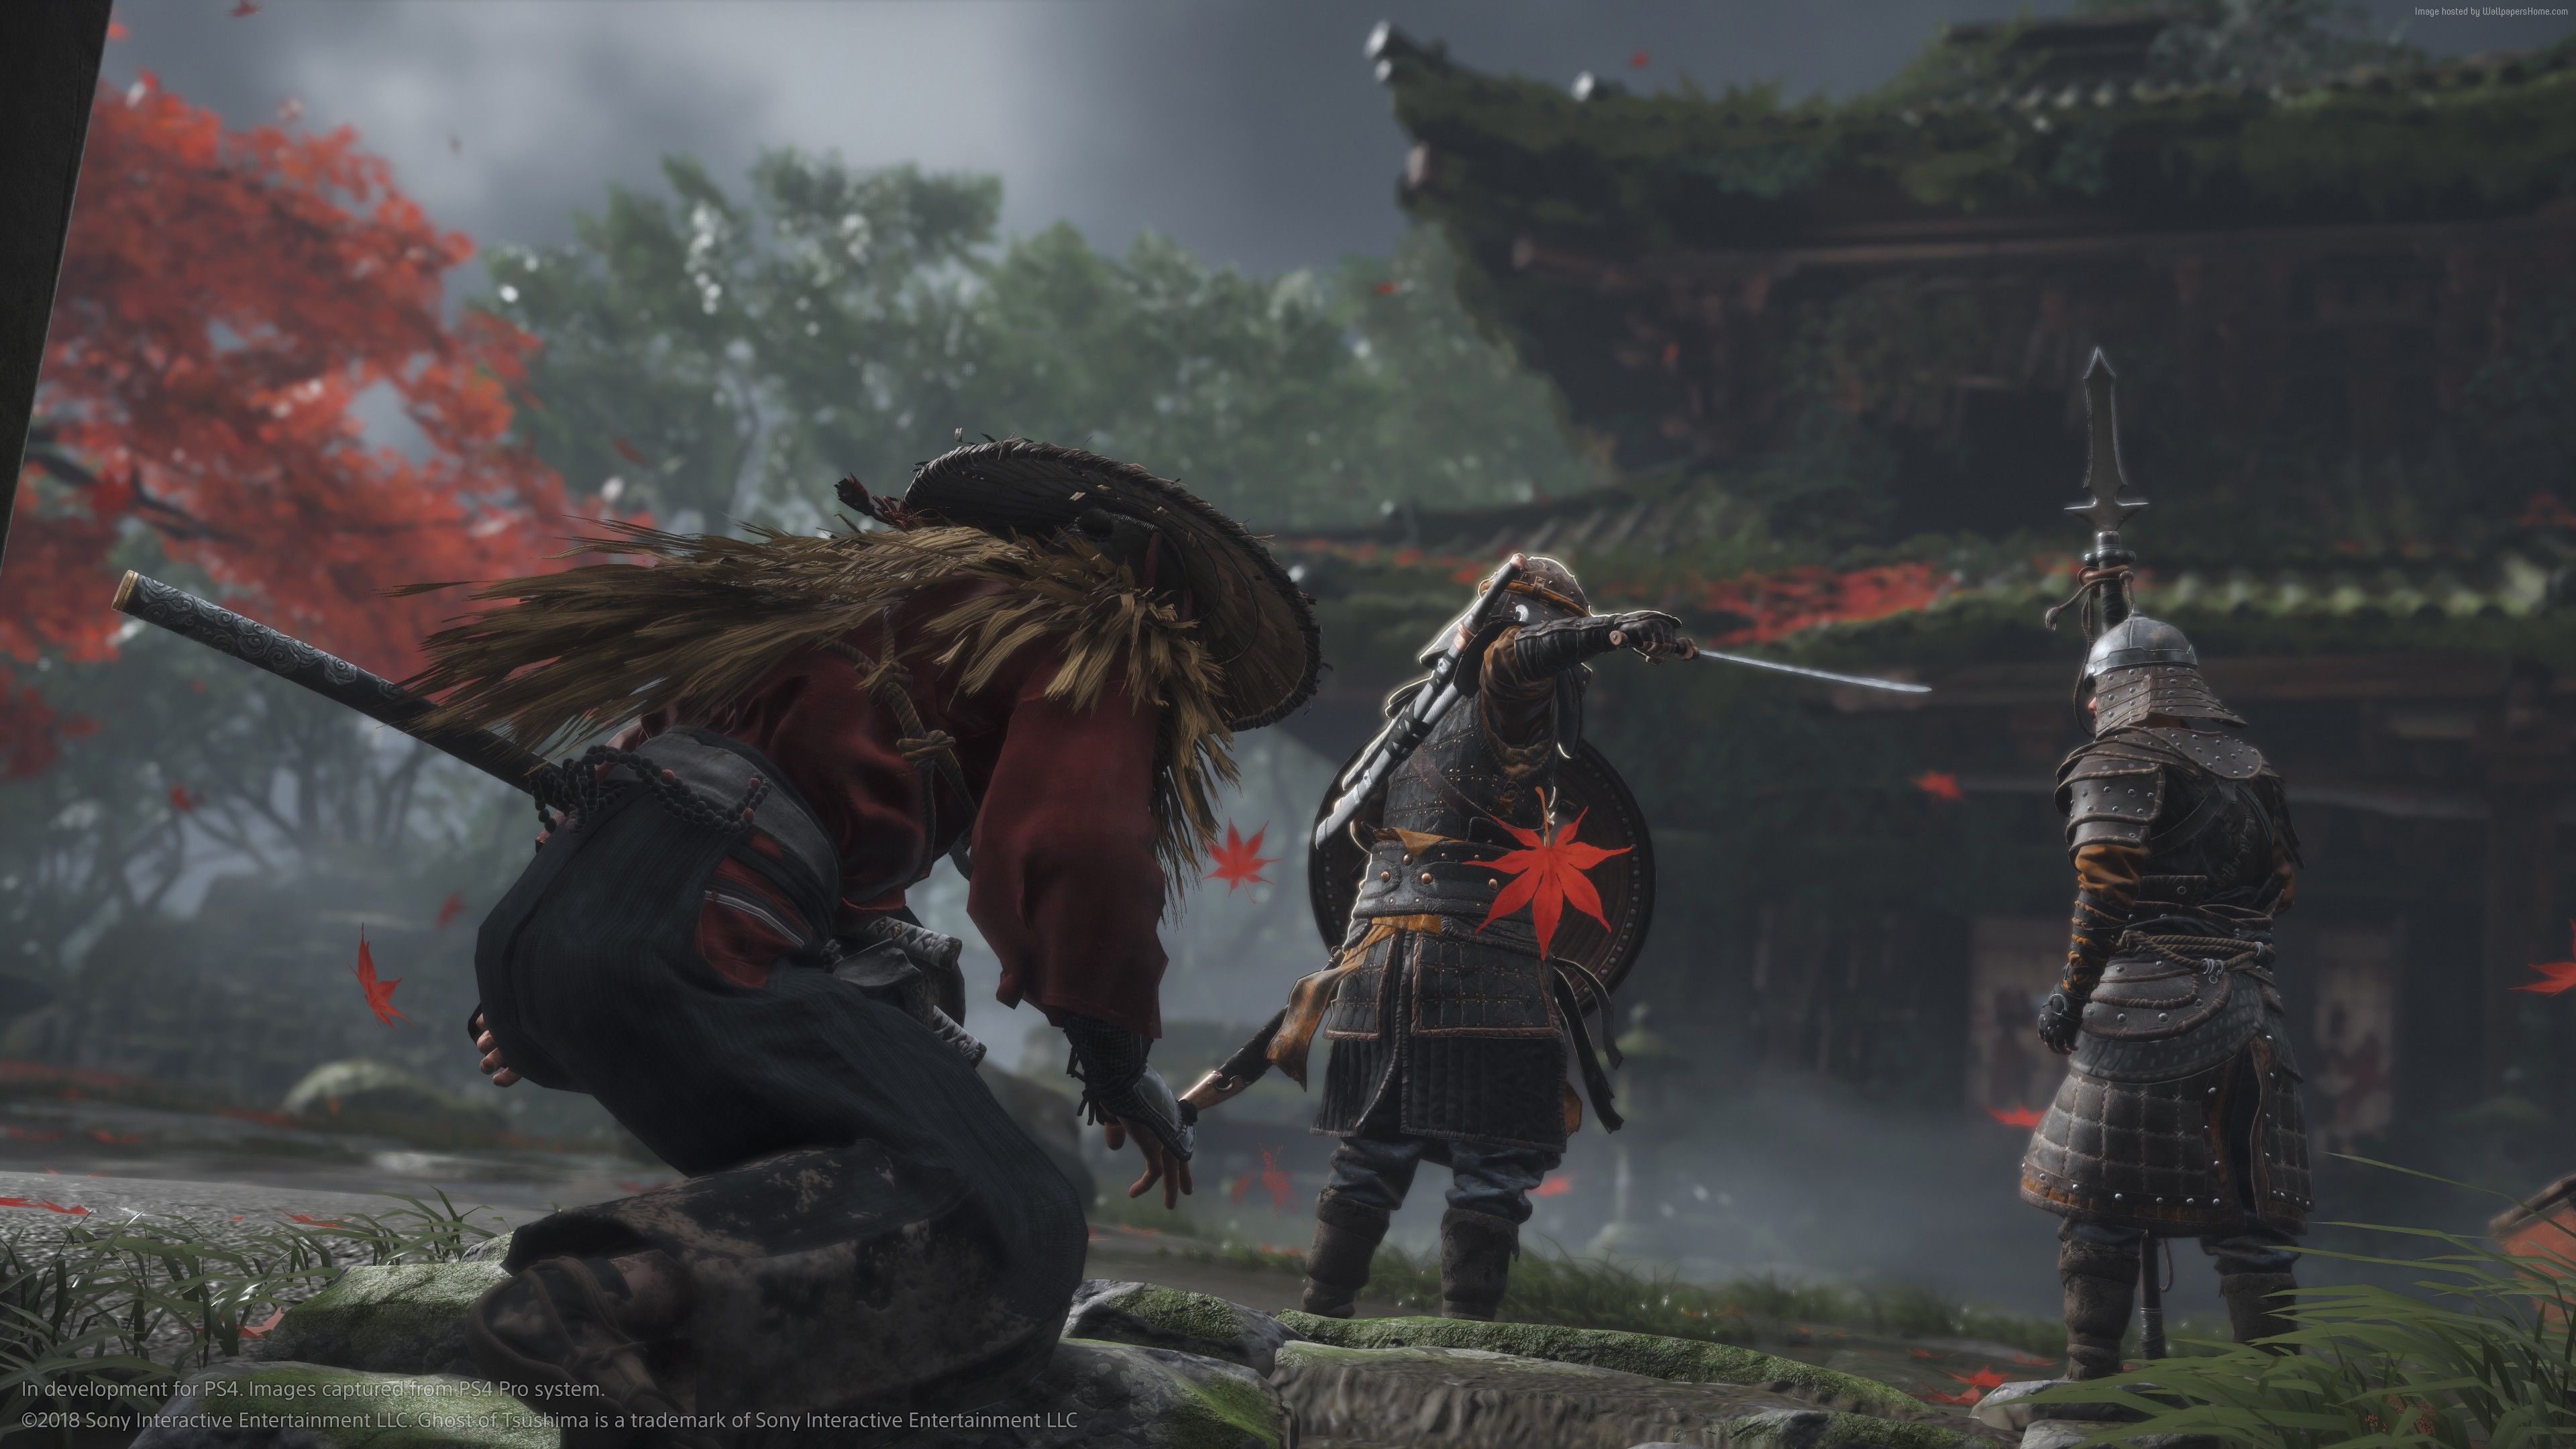 Posting ghost of Tsushima pics everyday until release 5 I